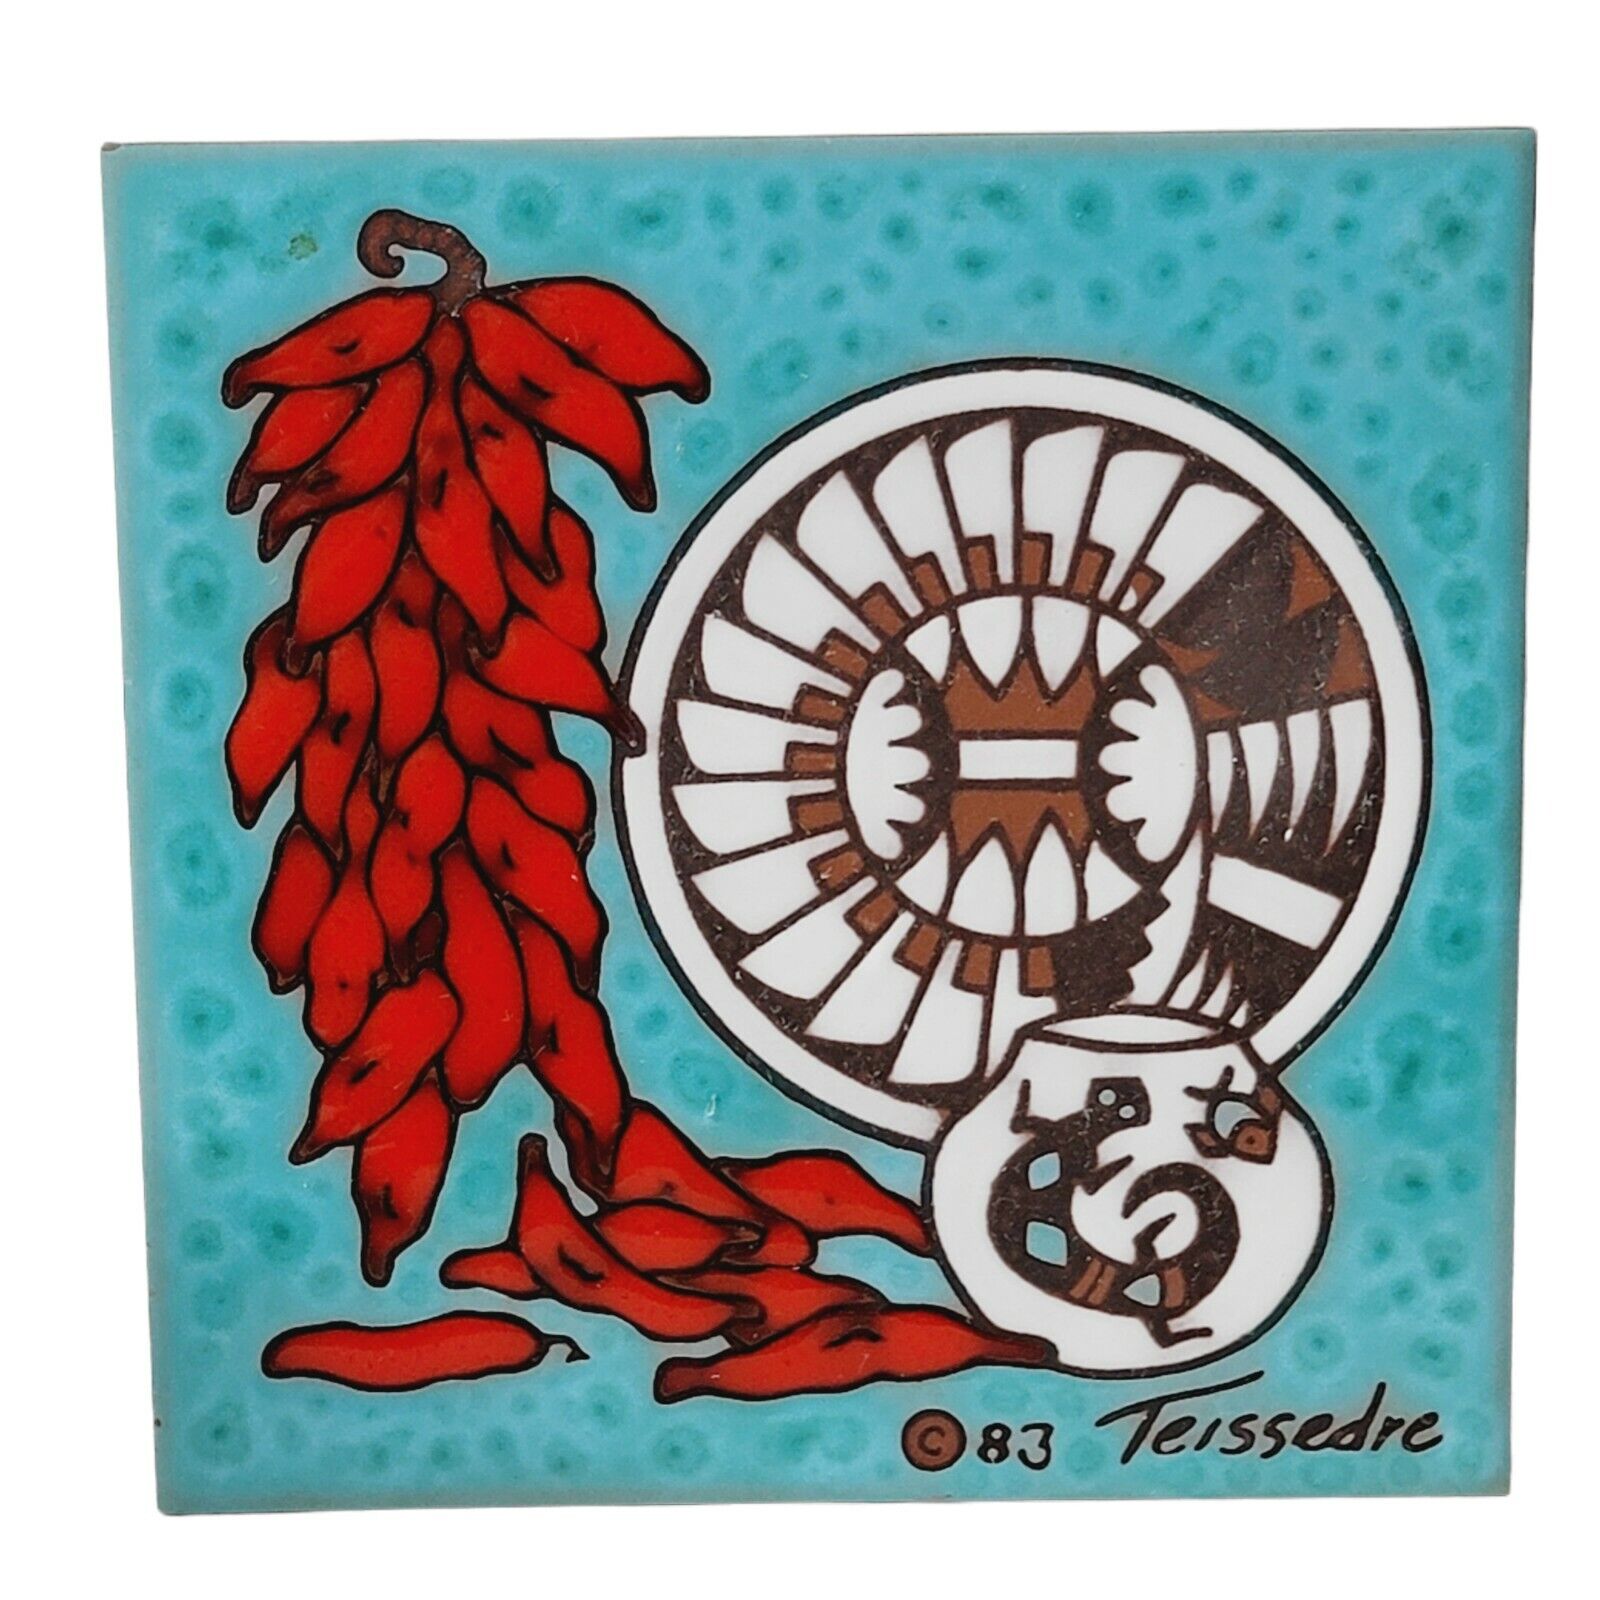 2 Cleo Teissedre Southwest Teal Red Hand Painted Art Tile Trivet Coaster ‘83 ‘90 Cleo Teissedre - фотография #2